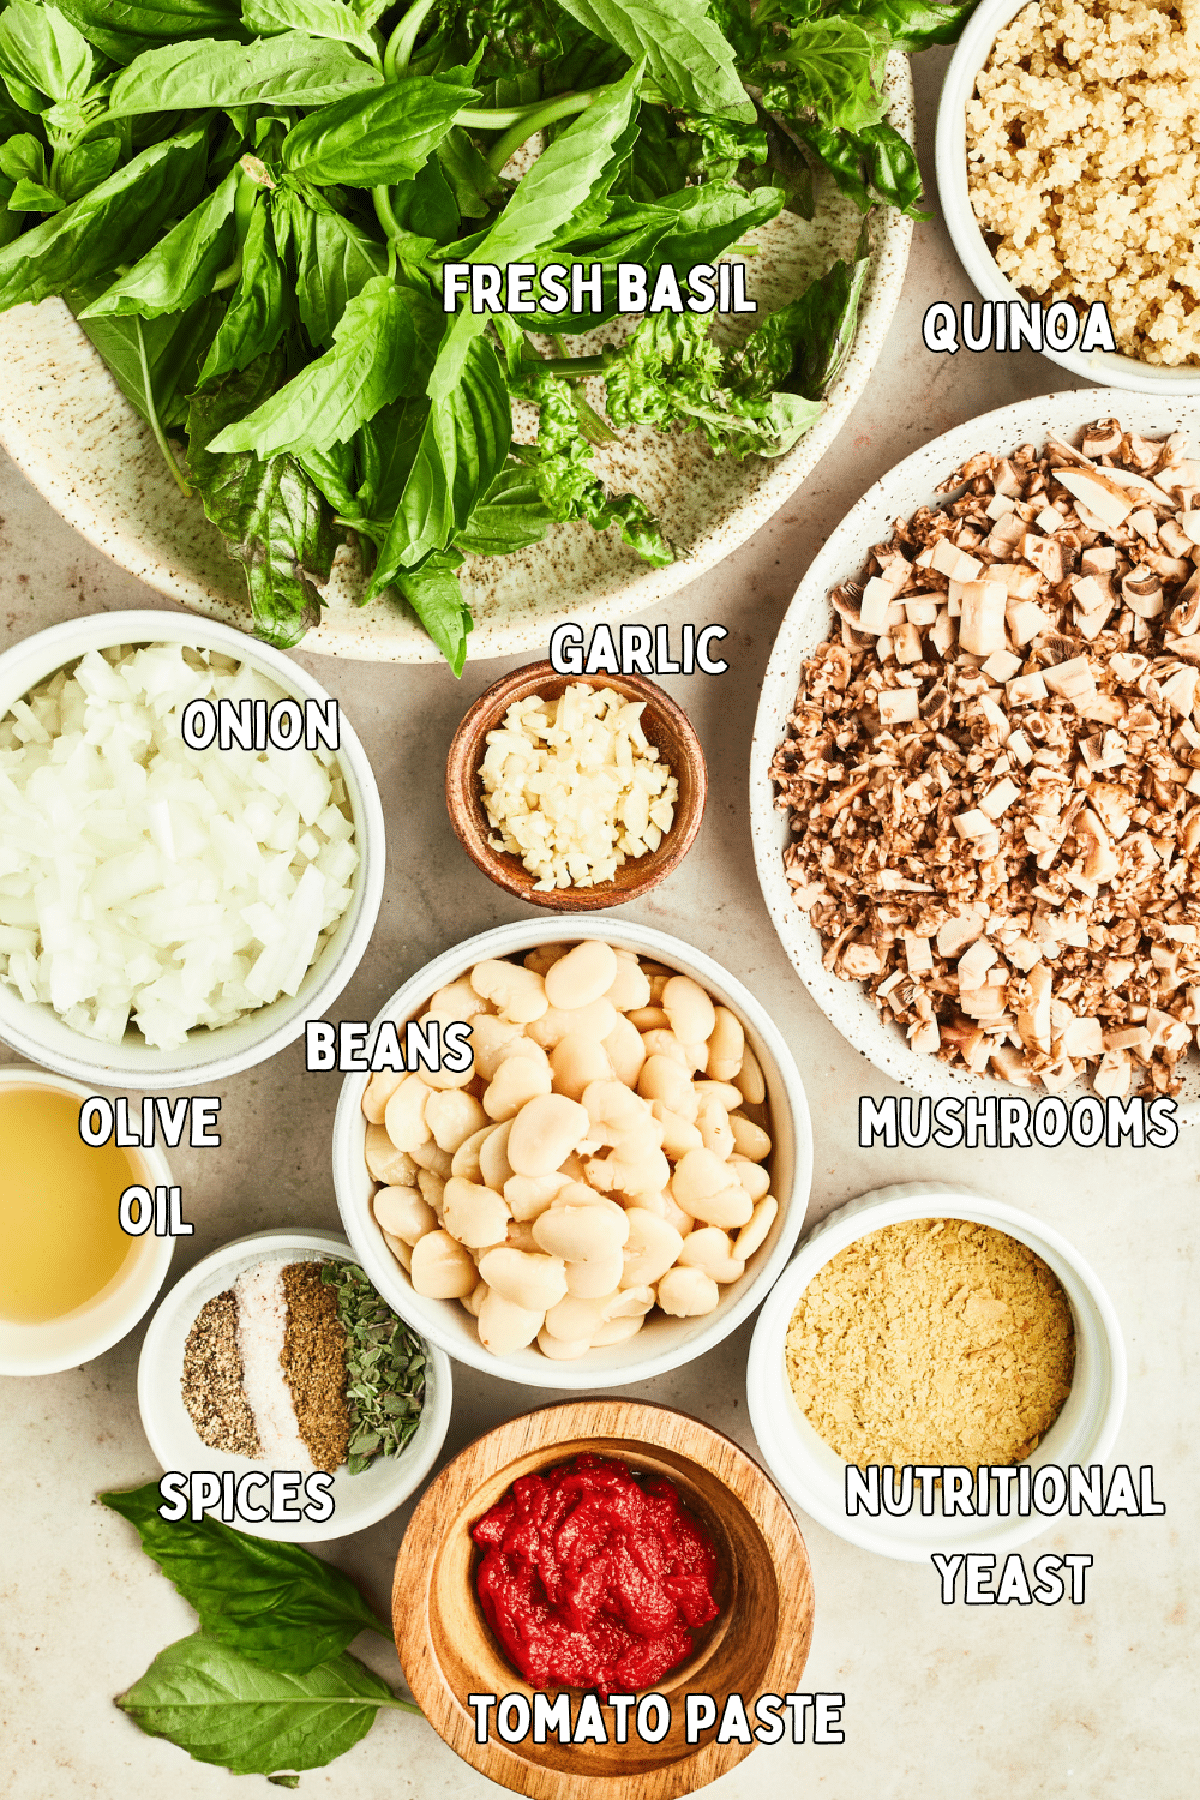 Overhead view of several bowls of ingredients to make basil quinoa meatballs: fresh basil, quinoa, mushrooms, garlic, onion, beans, nutritional yeast, tomato paste, olive oil, and spices.